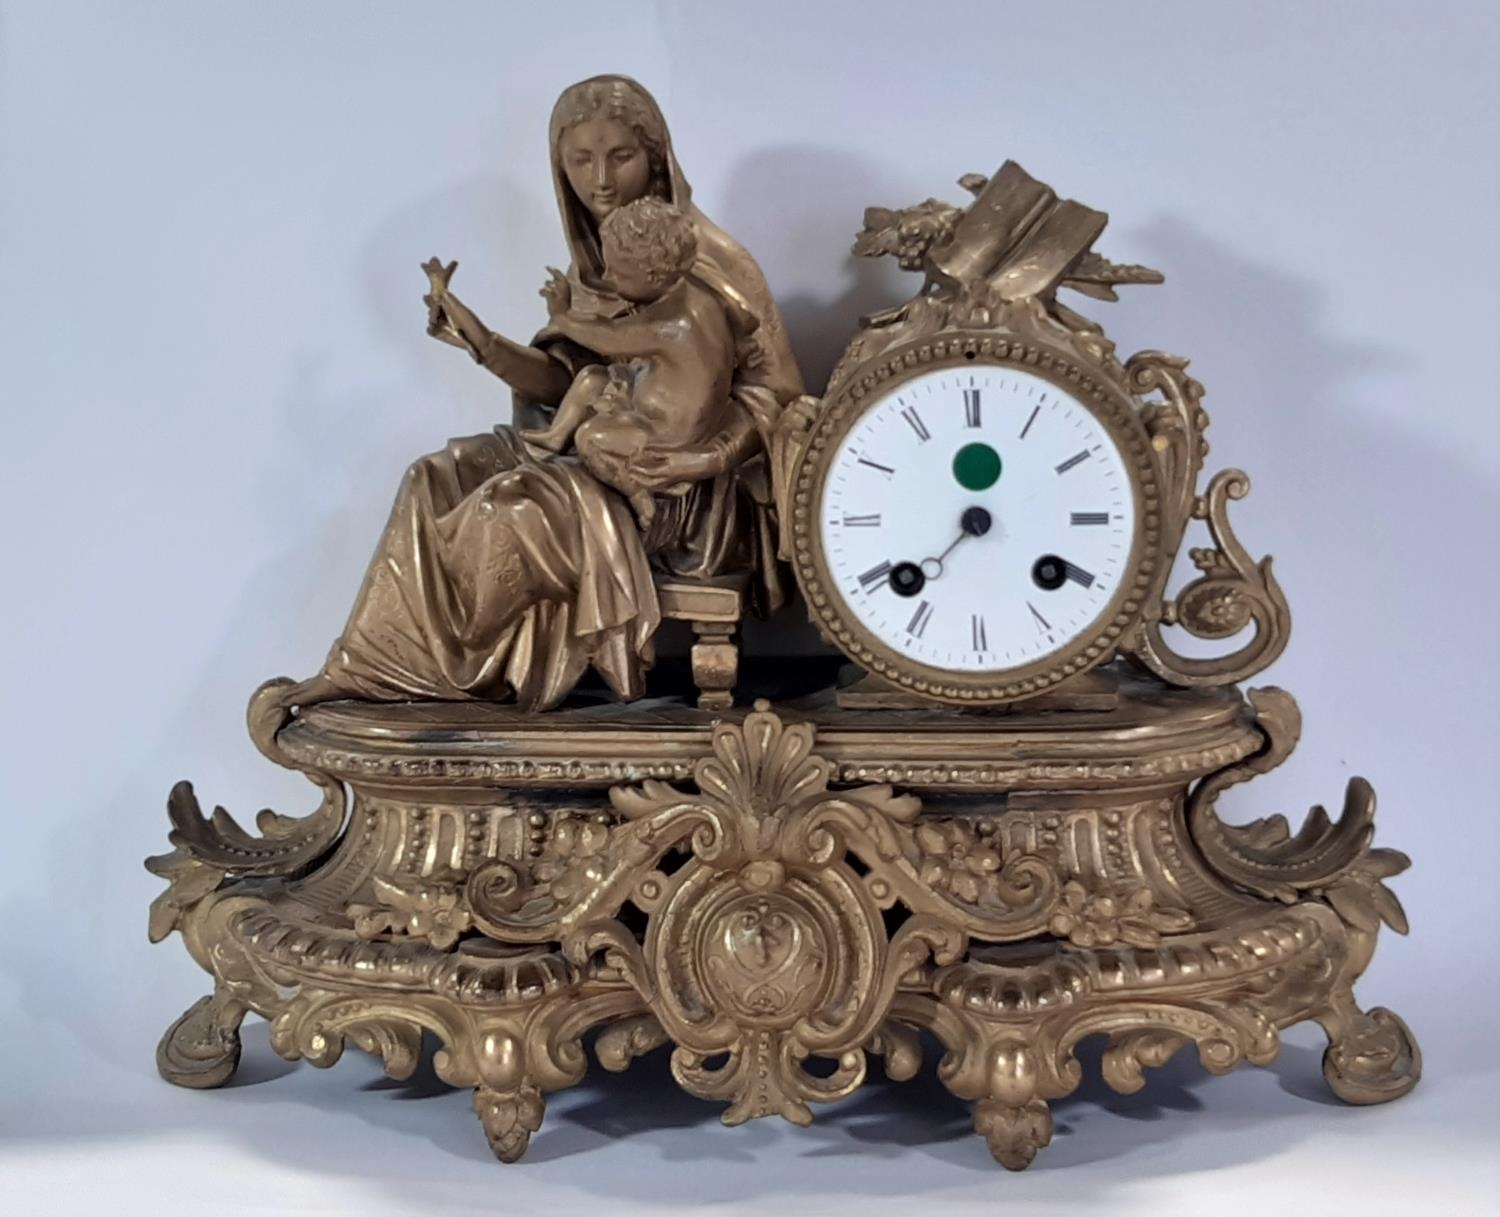 19th century gilt brass mantle clock, the decorative case showing mother and child with eight day